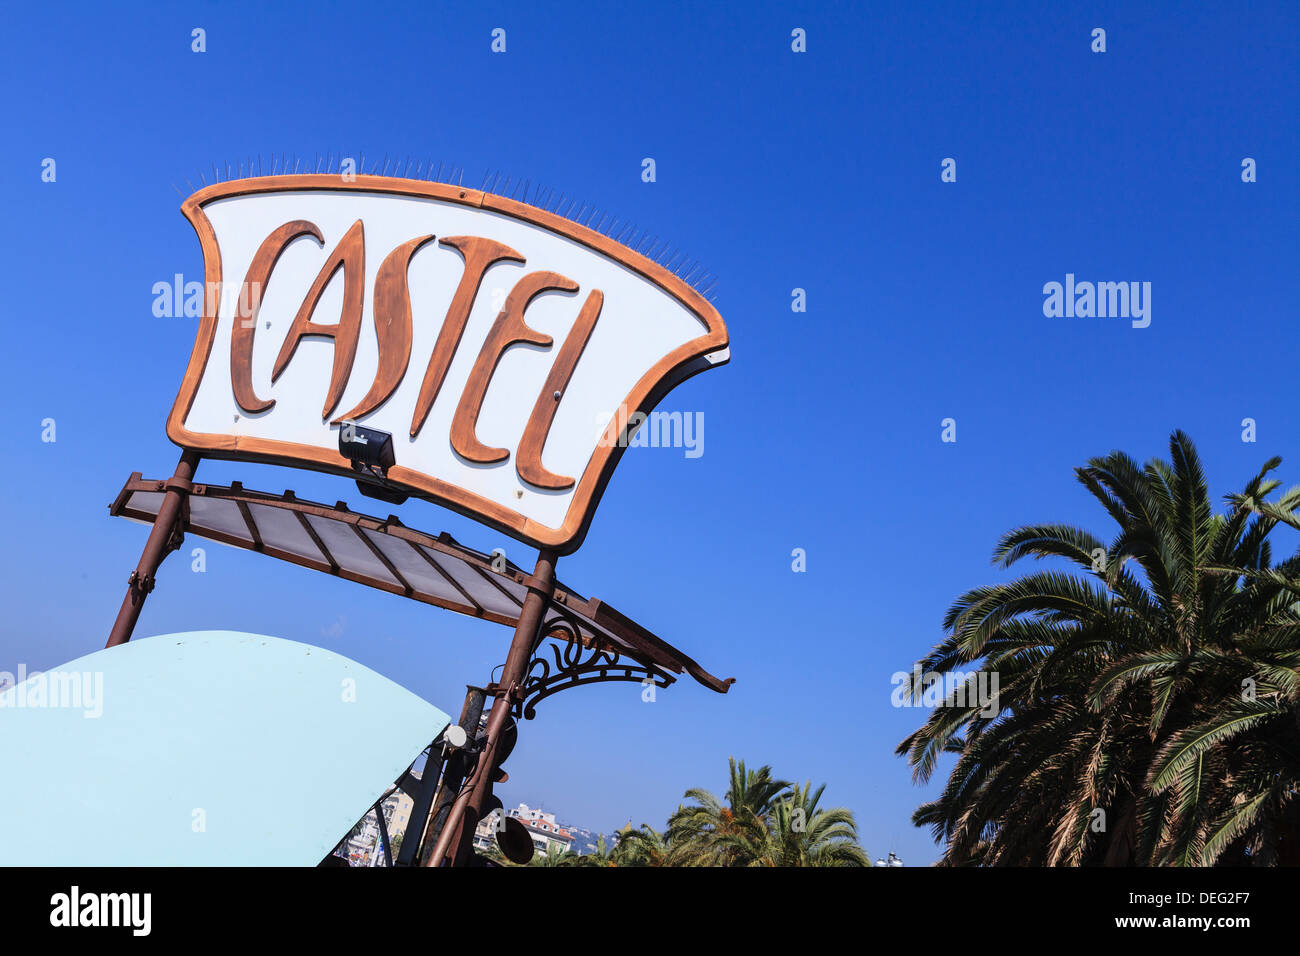 Castel Plage beach sign, Nice, Alpes Maritimes, Provence, Cote d'Azur, France, French Riviera, Europe Stock Photo